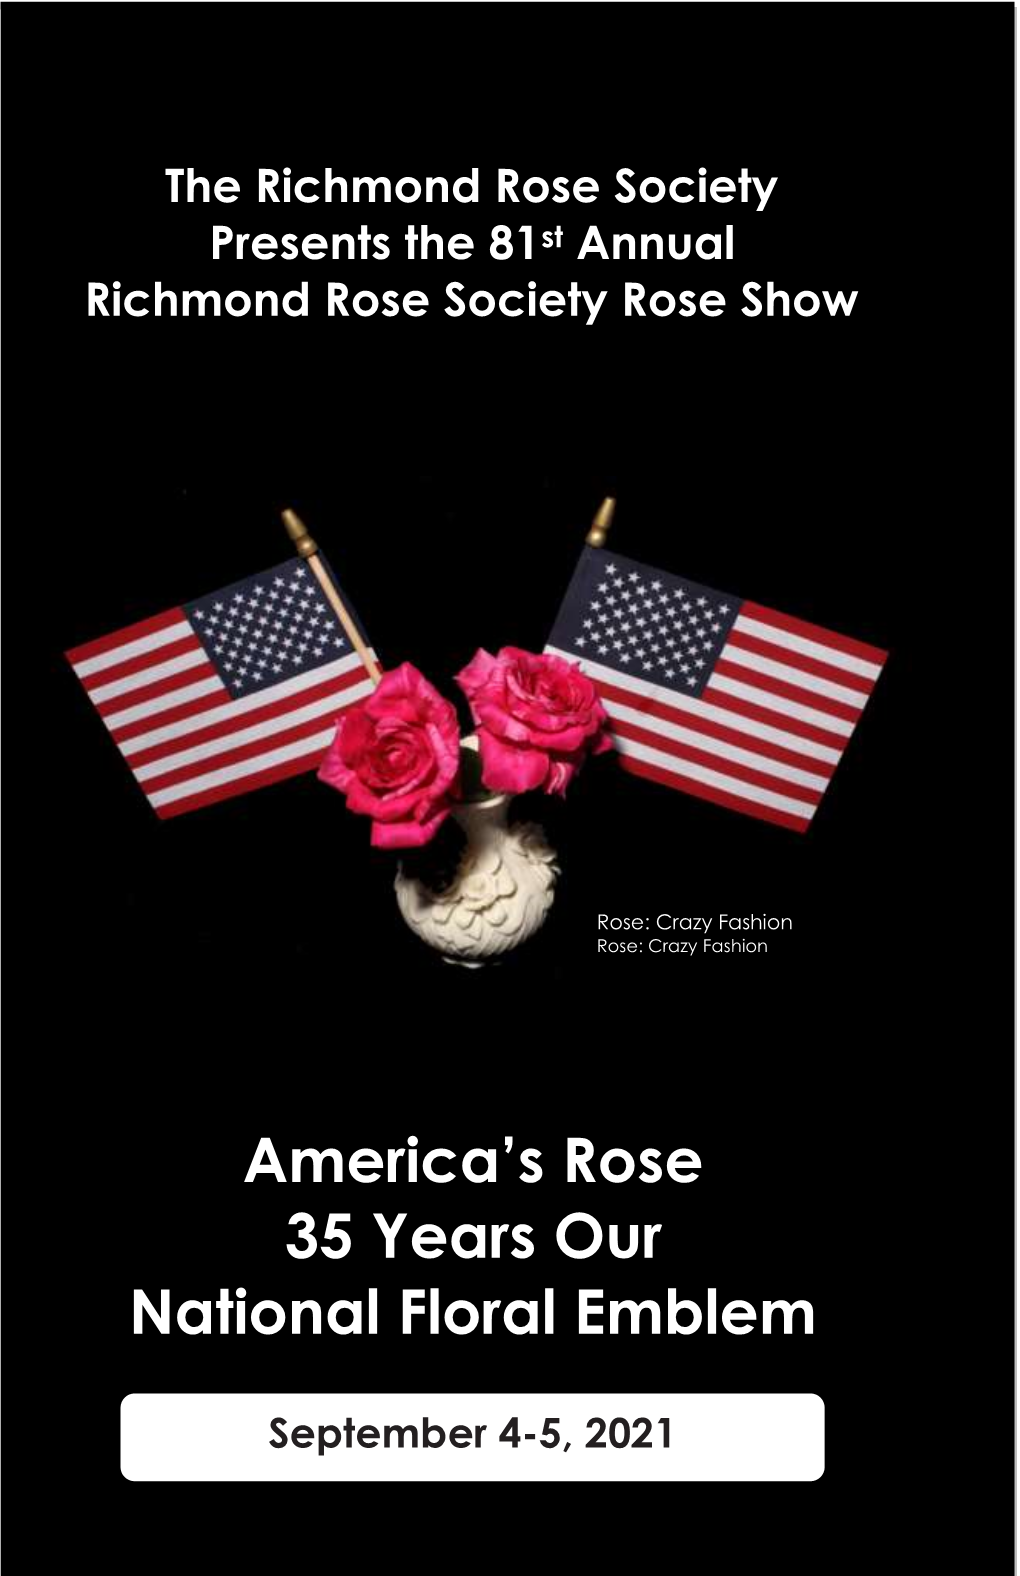 America's Rose 35 Years Our National Floral Emblem